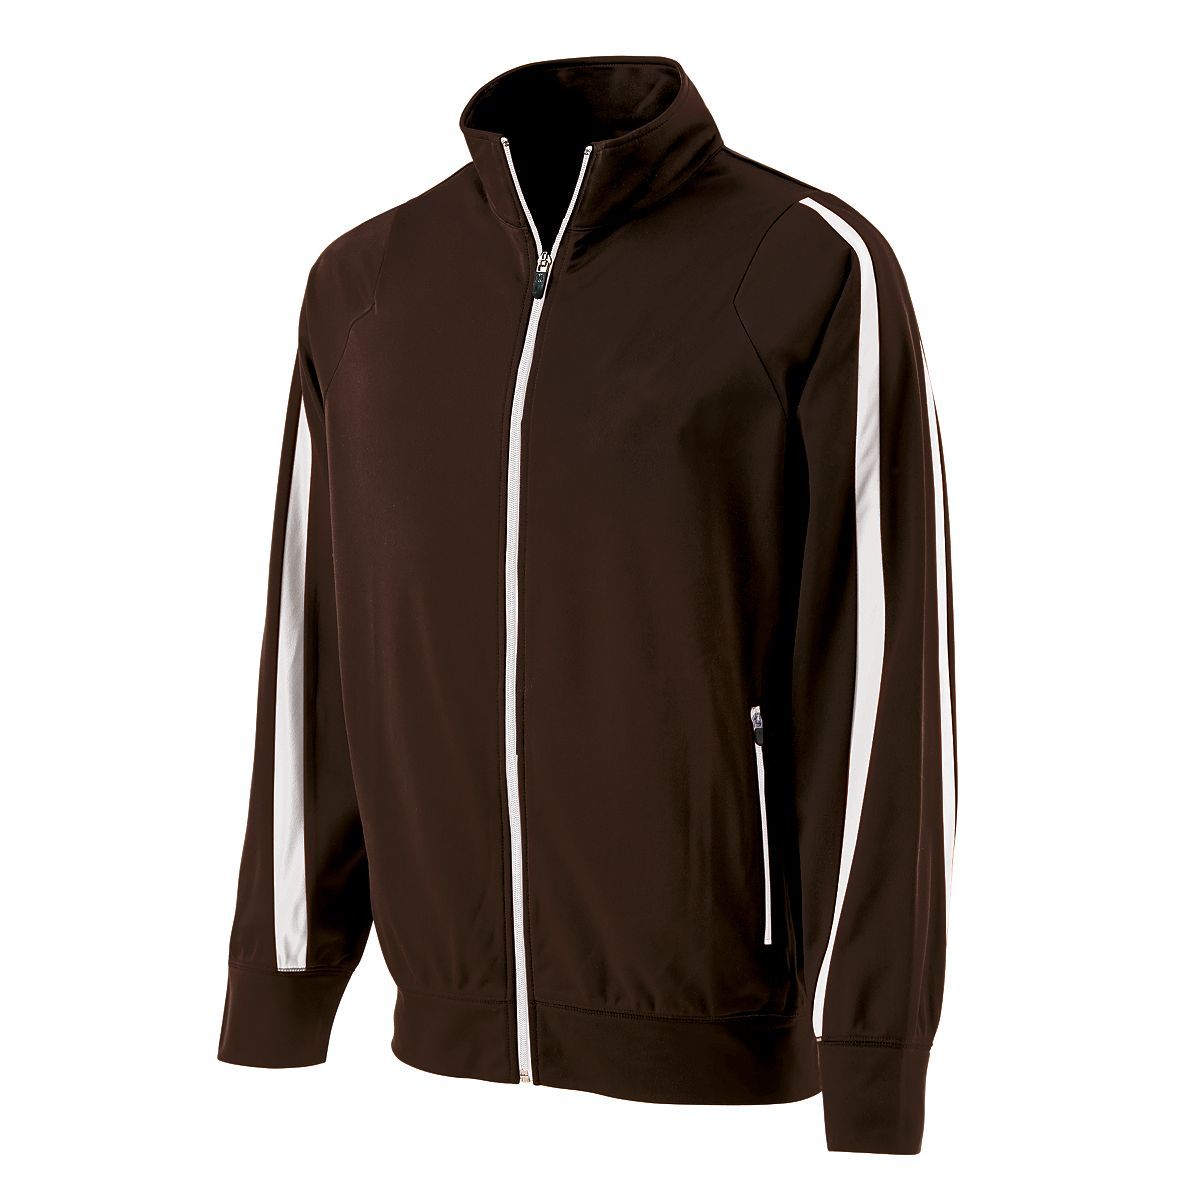 Holloway Determination Jacket in Brown/White  -Part of the Adult, Adult-Jacket, Holloway, Outerwear product lines at KanaleyCreations.com